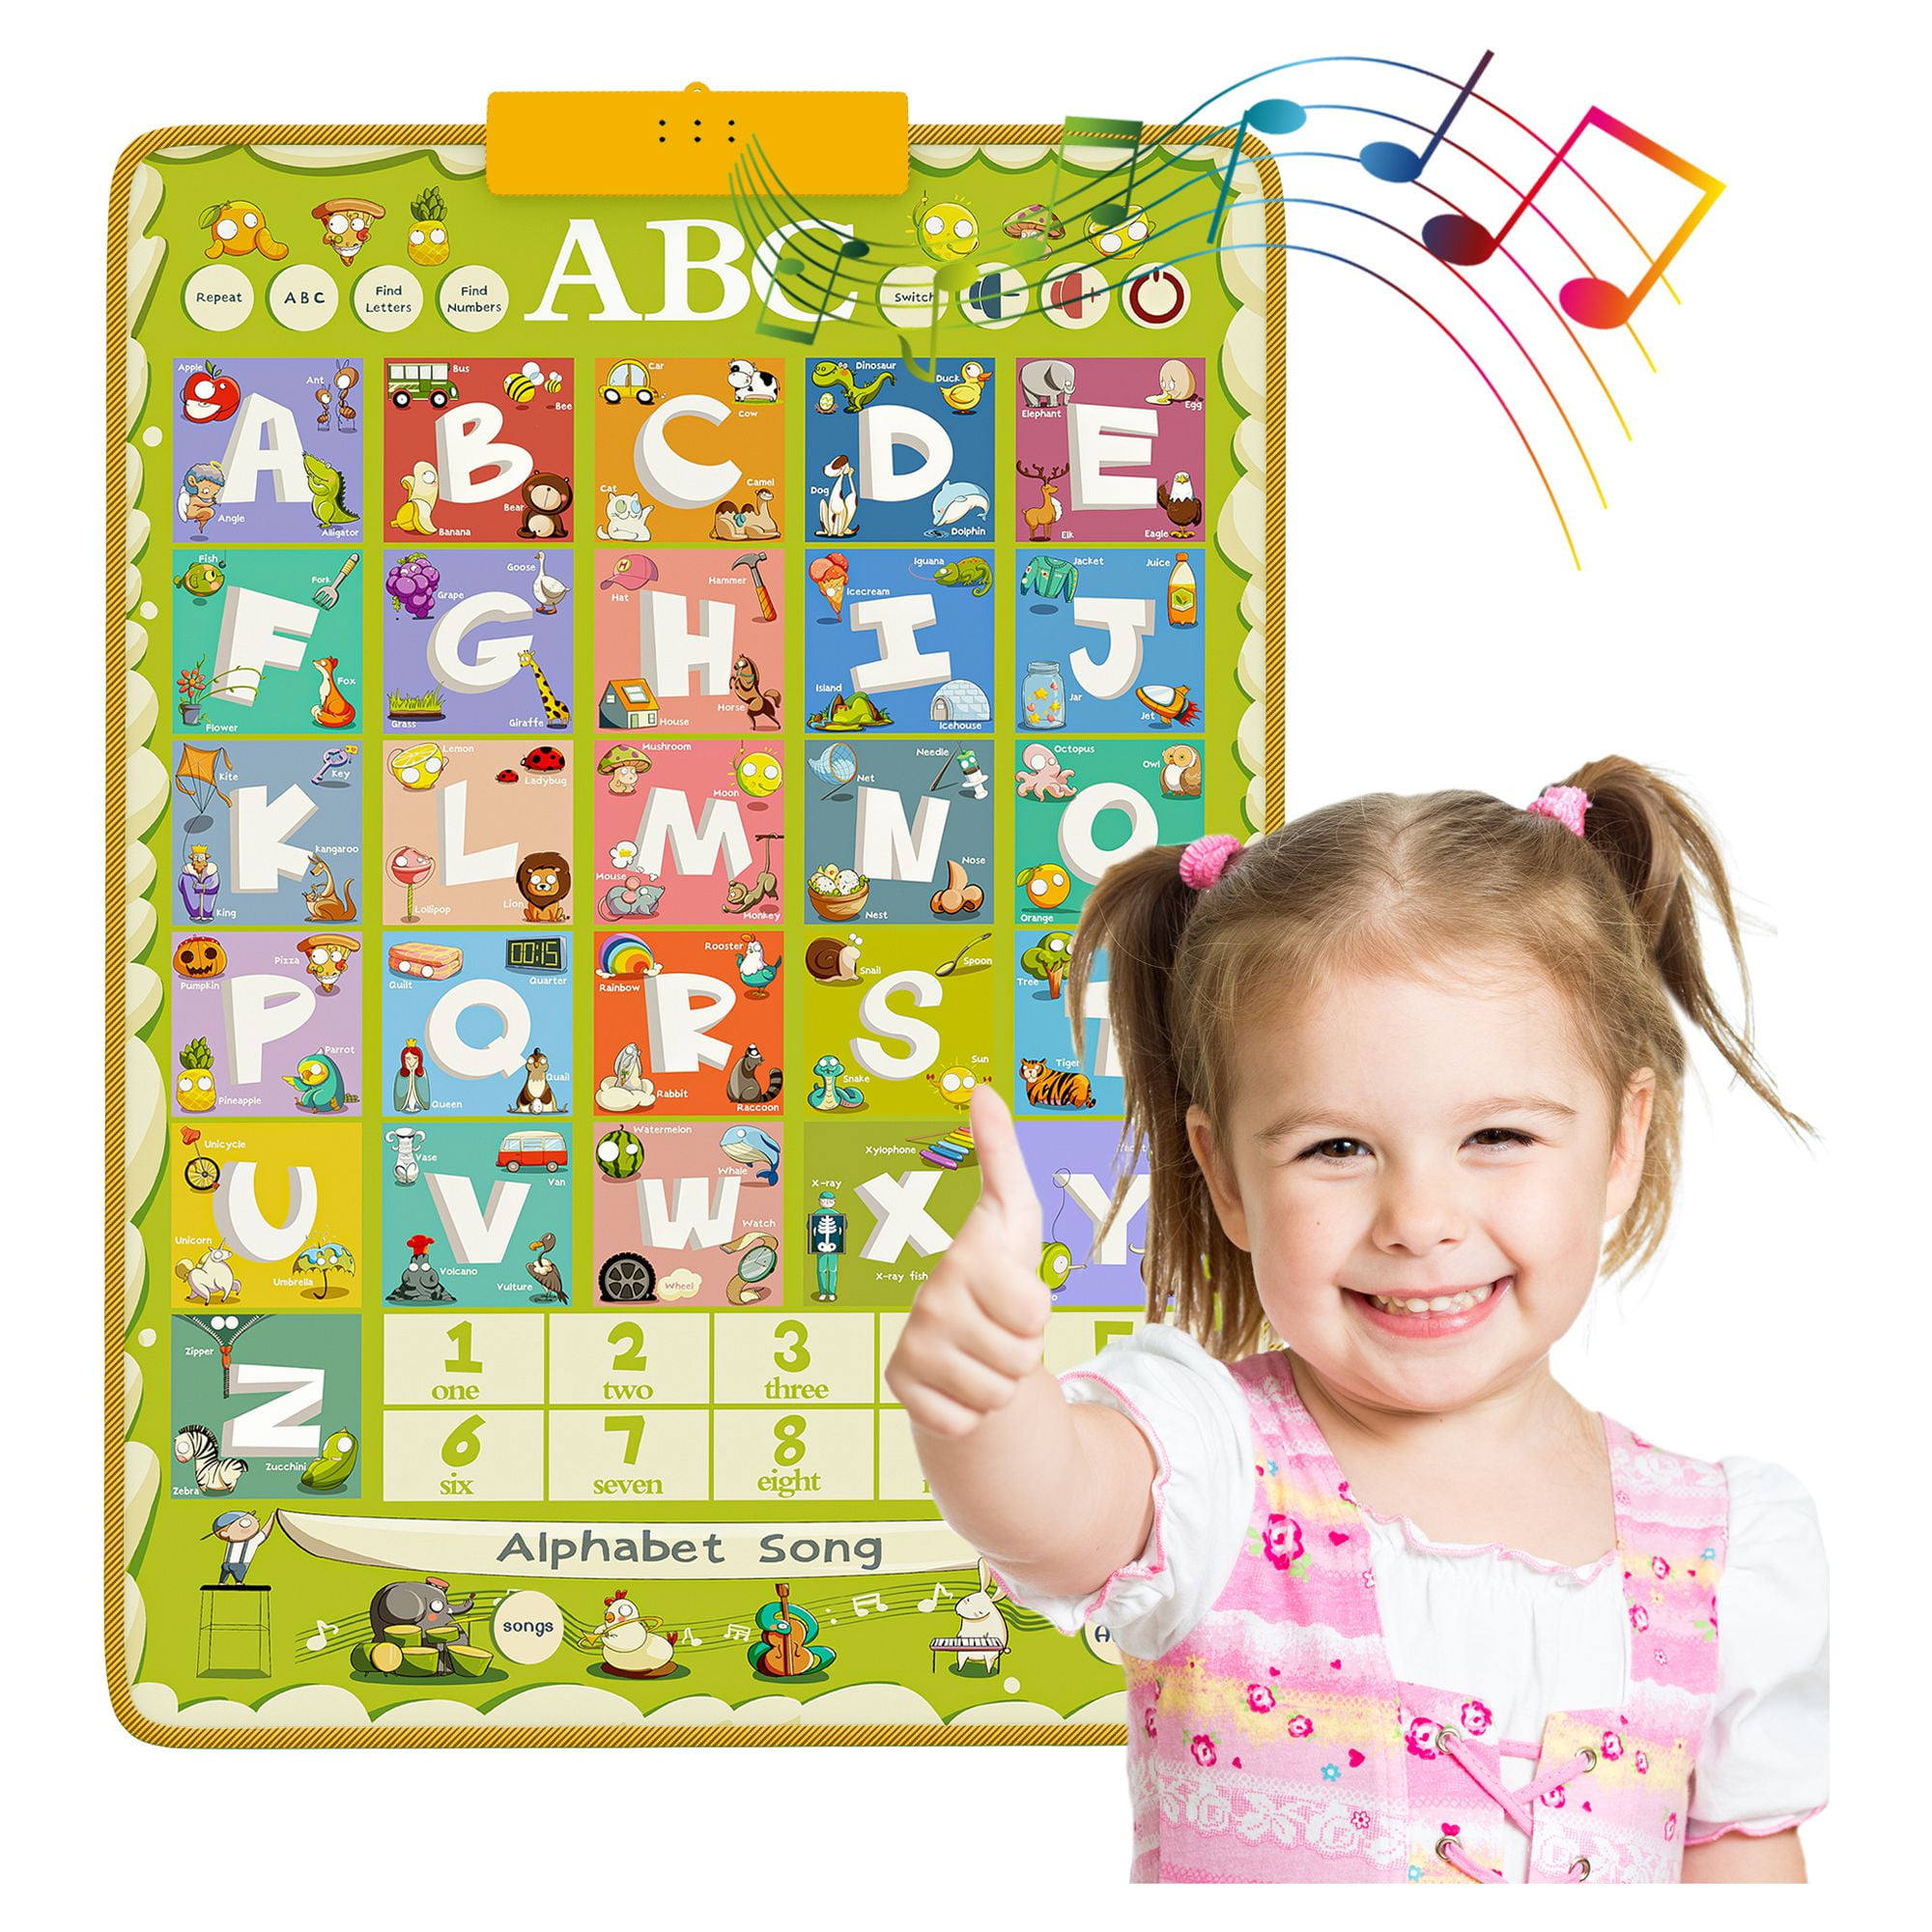 Adofi Upgraded Electronic Alphabet Chart, ABC Chart for Toddler and ...